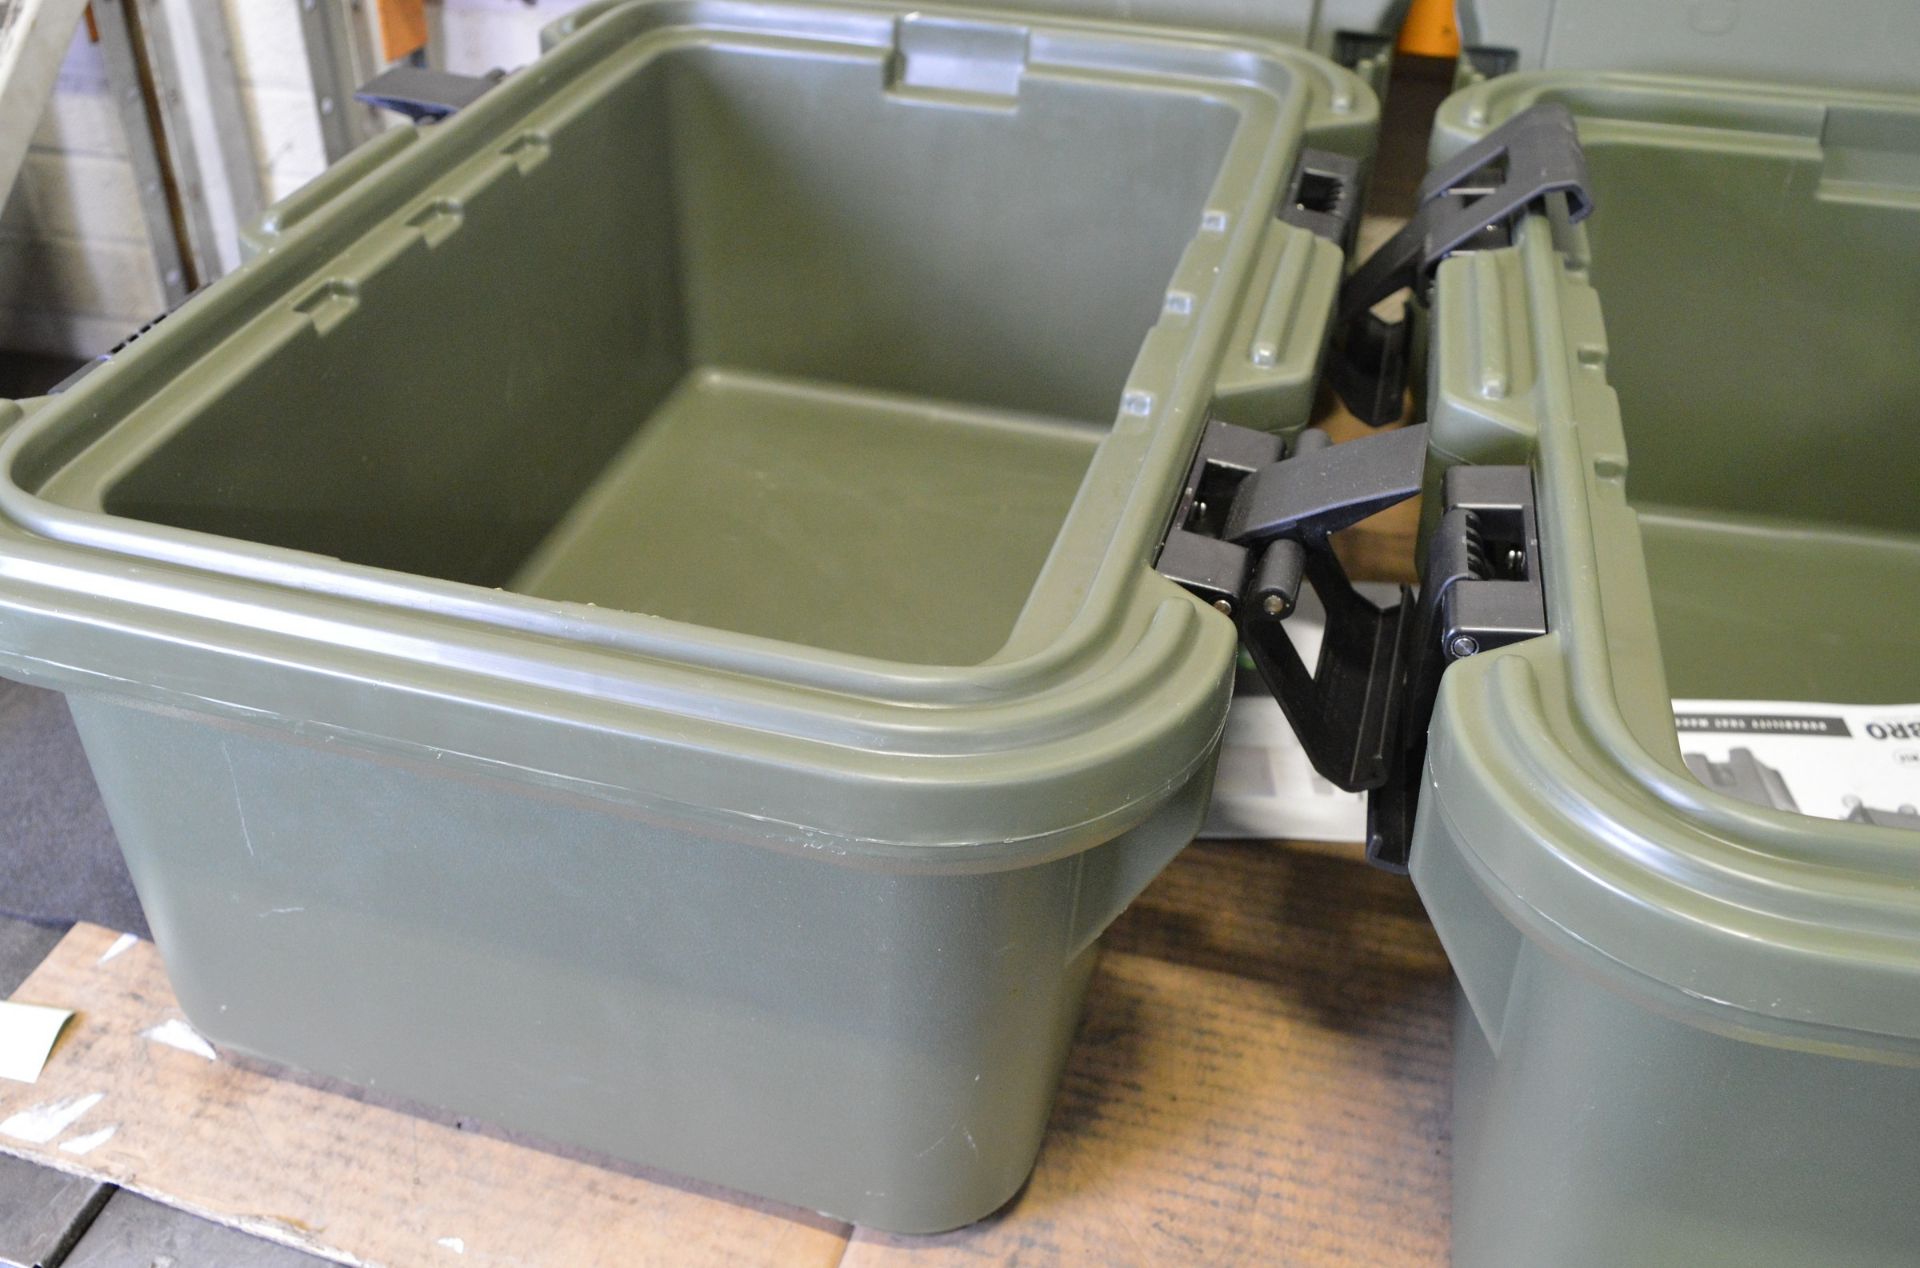 3x Cambro Green Empty Food Containers (insulated) - L650 x W44 x H32mm - Image 2 of 3